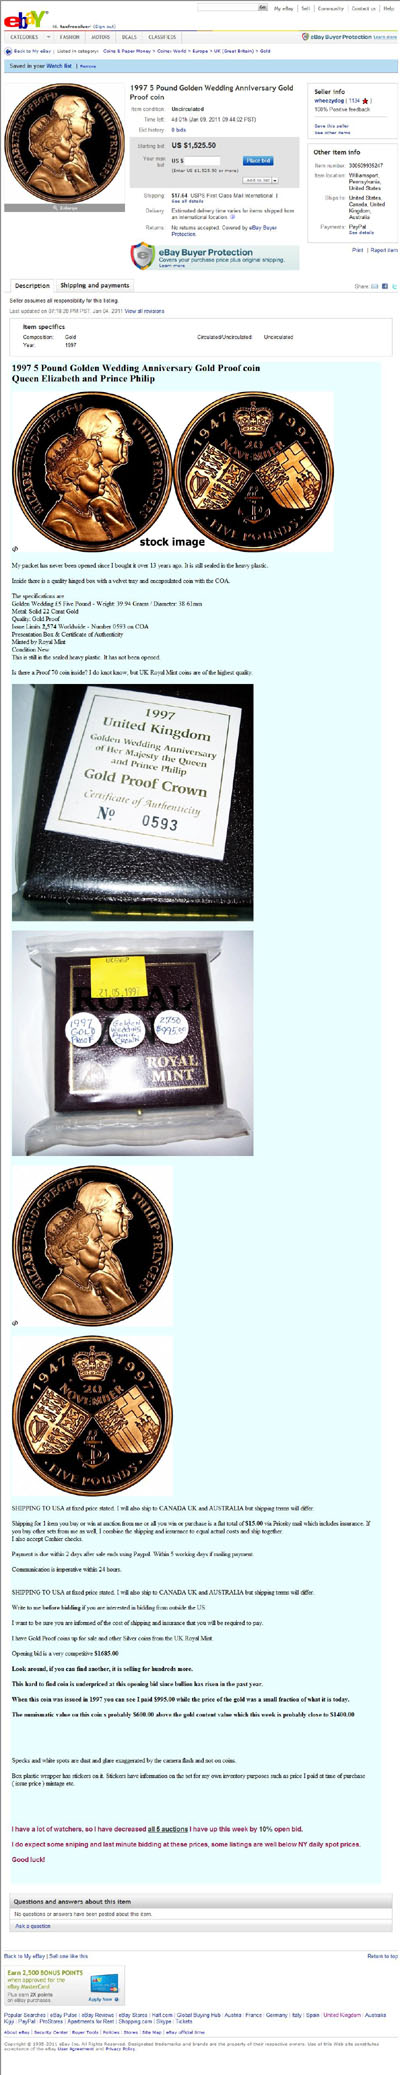 wheezydog's eBay Listing Using our 1997 Golden Wedding Anniversary Gold Proof Crown Photographs